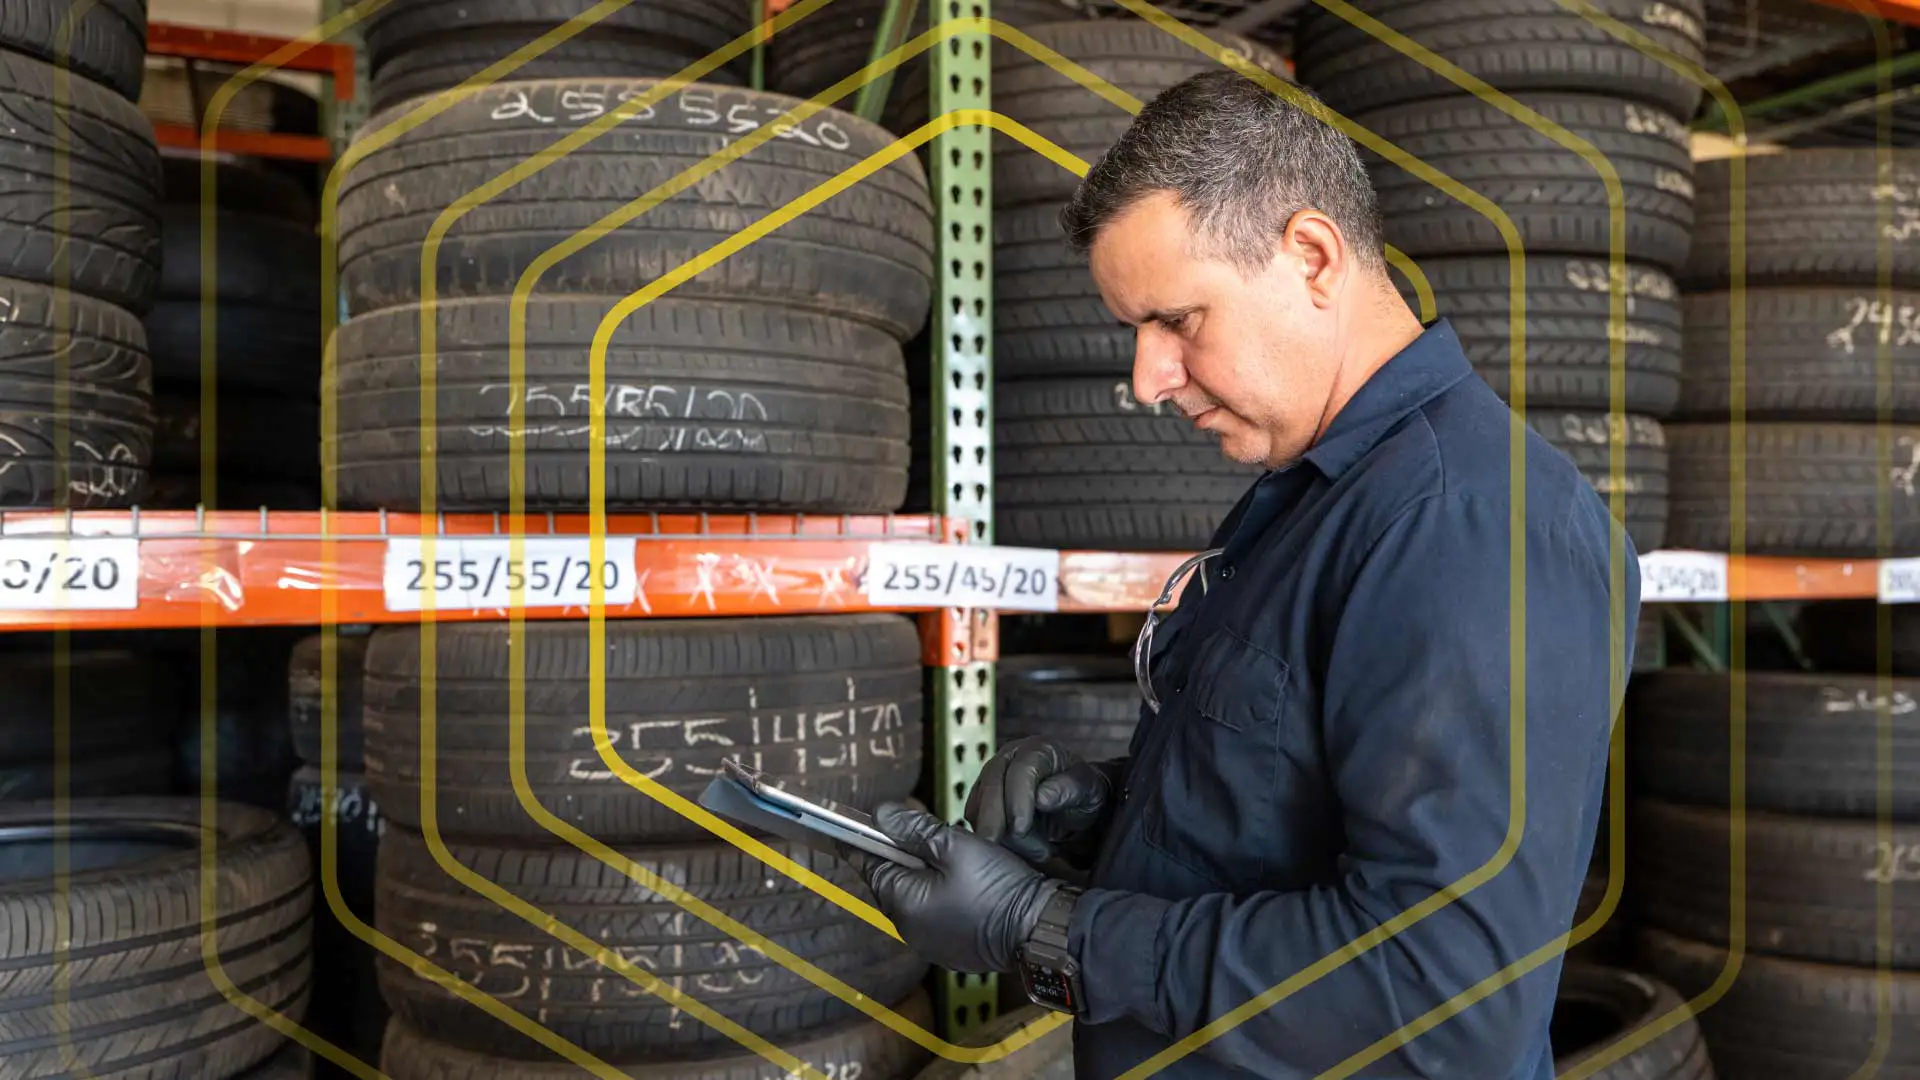 Man taking tire inventory